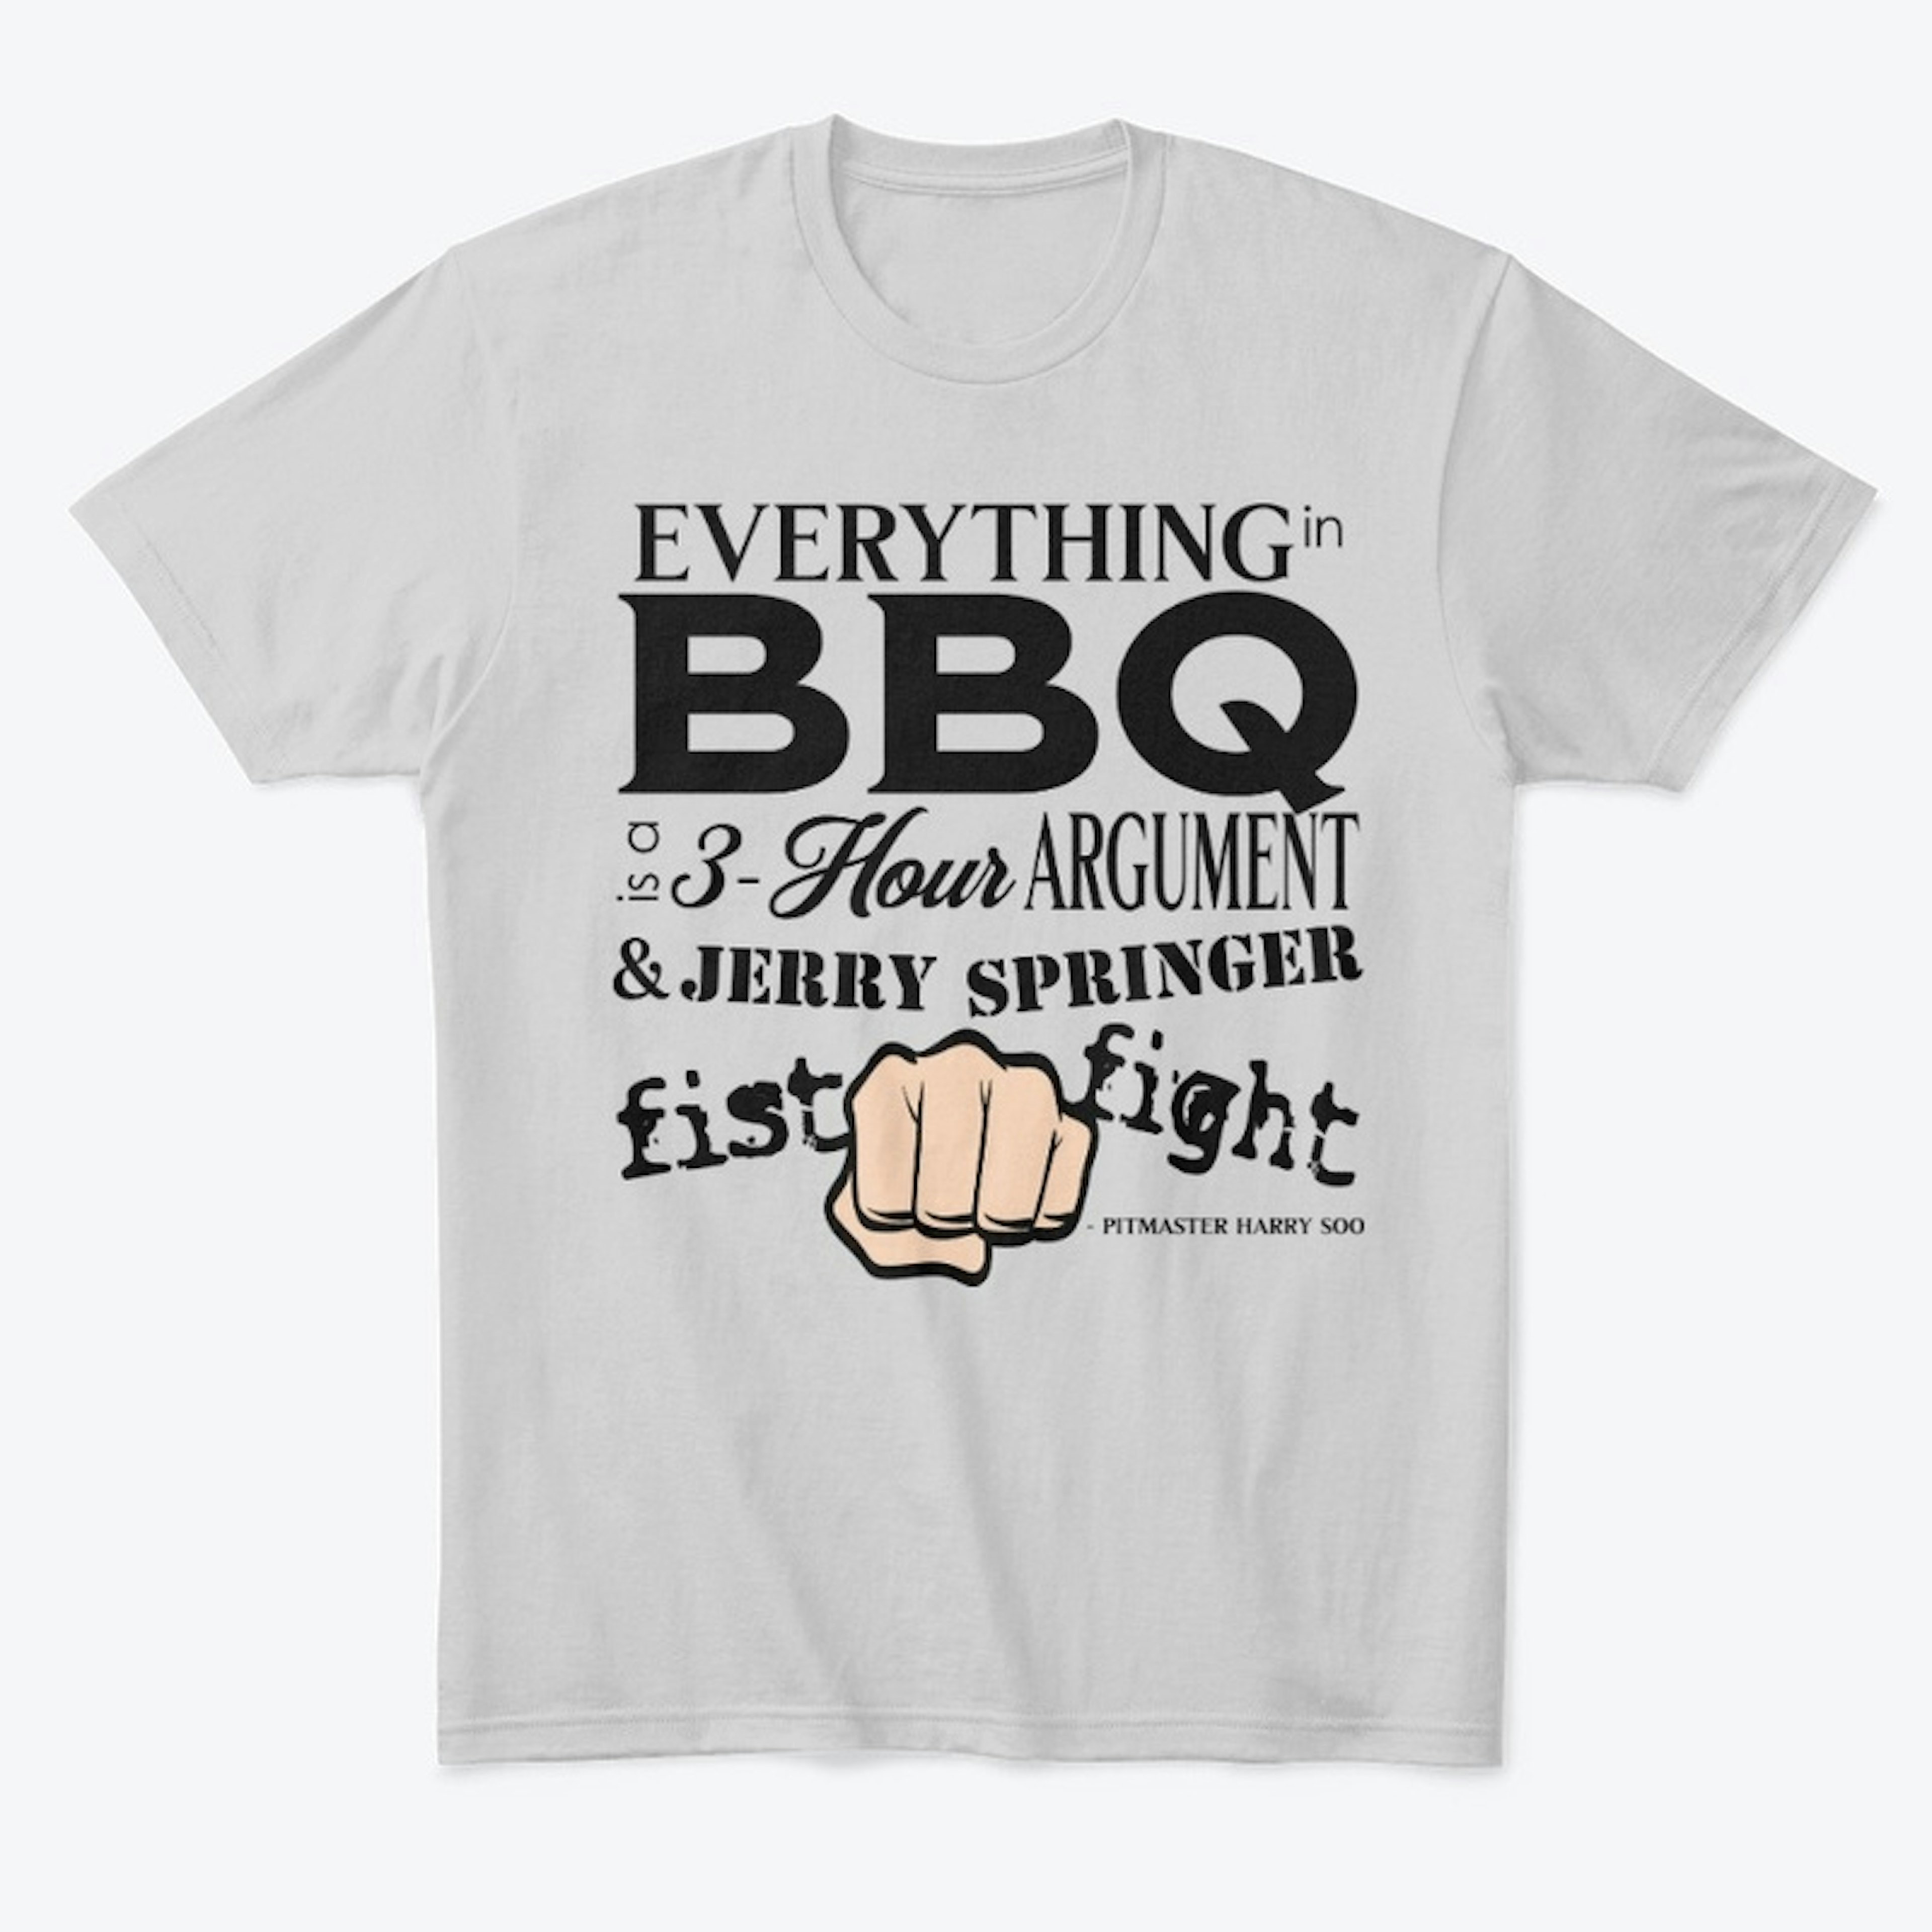 Everything BBQ Is a 3 Hour Argument